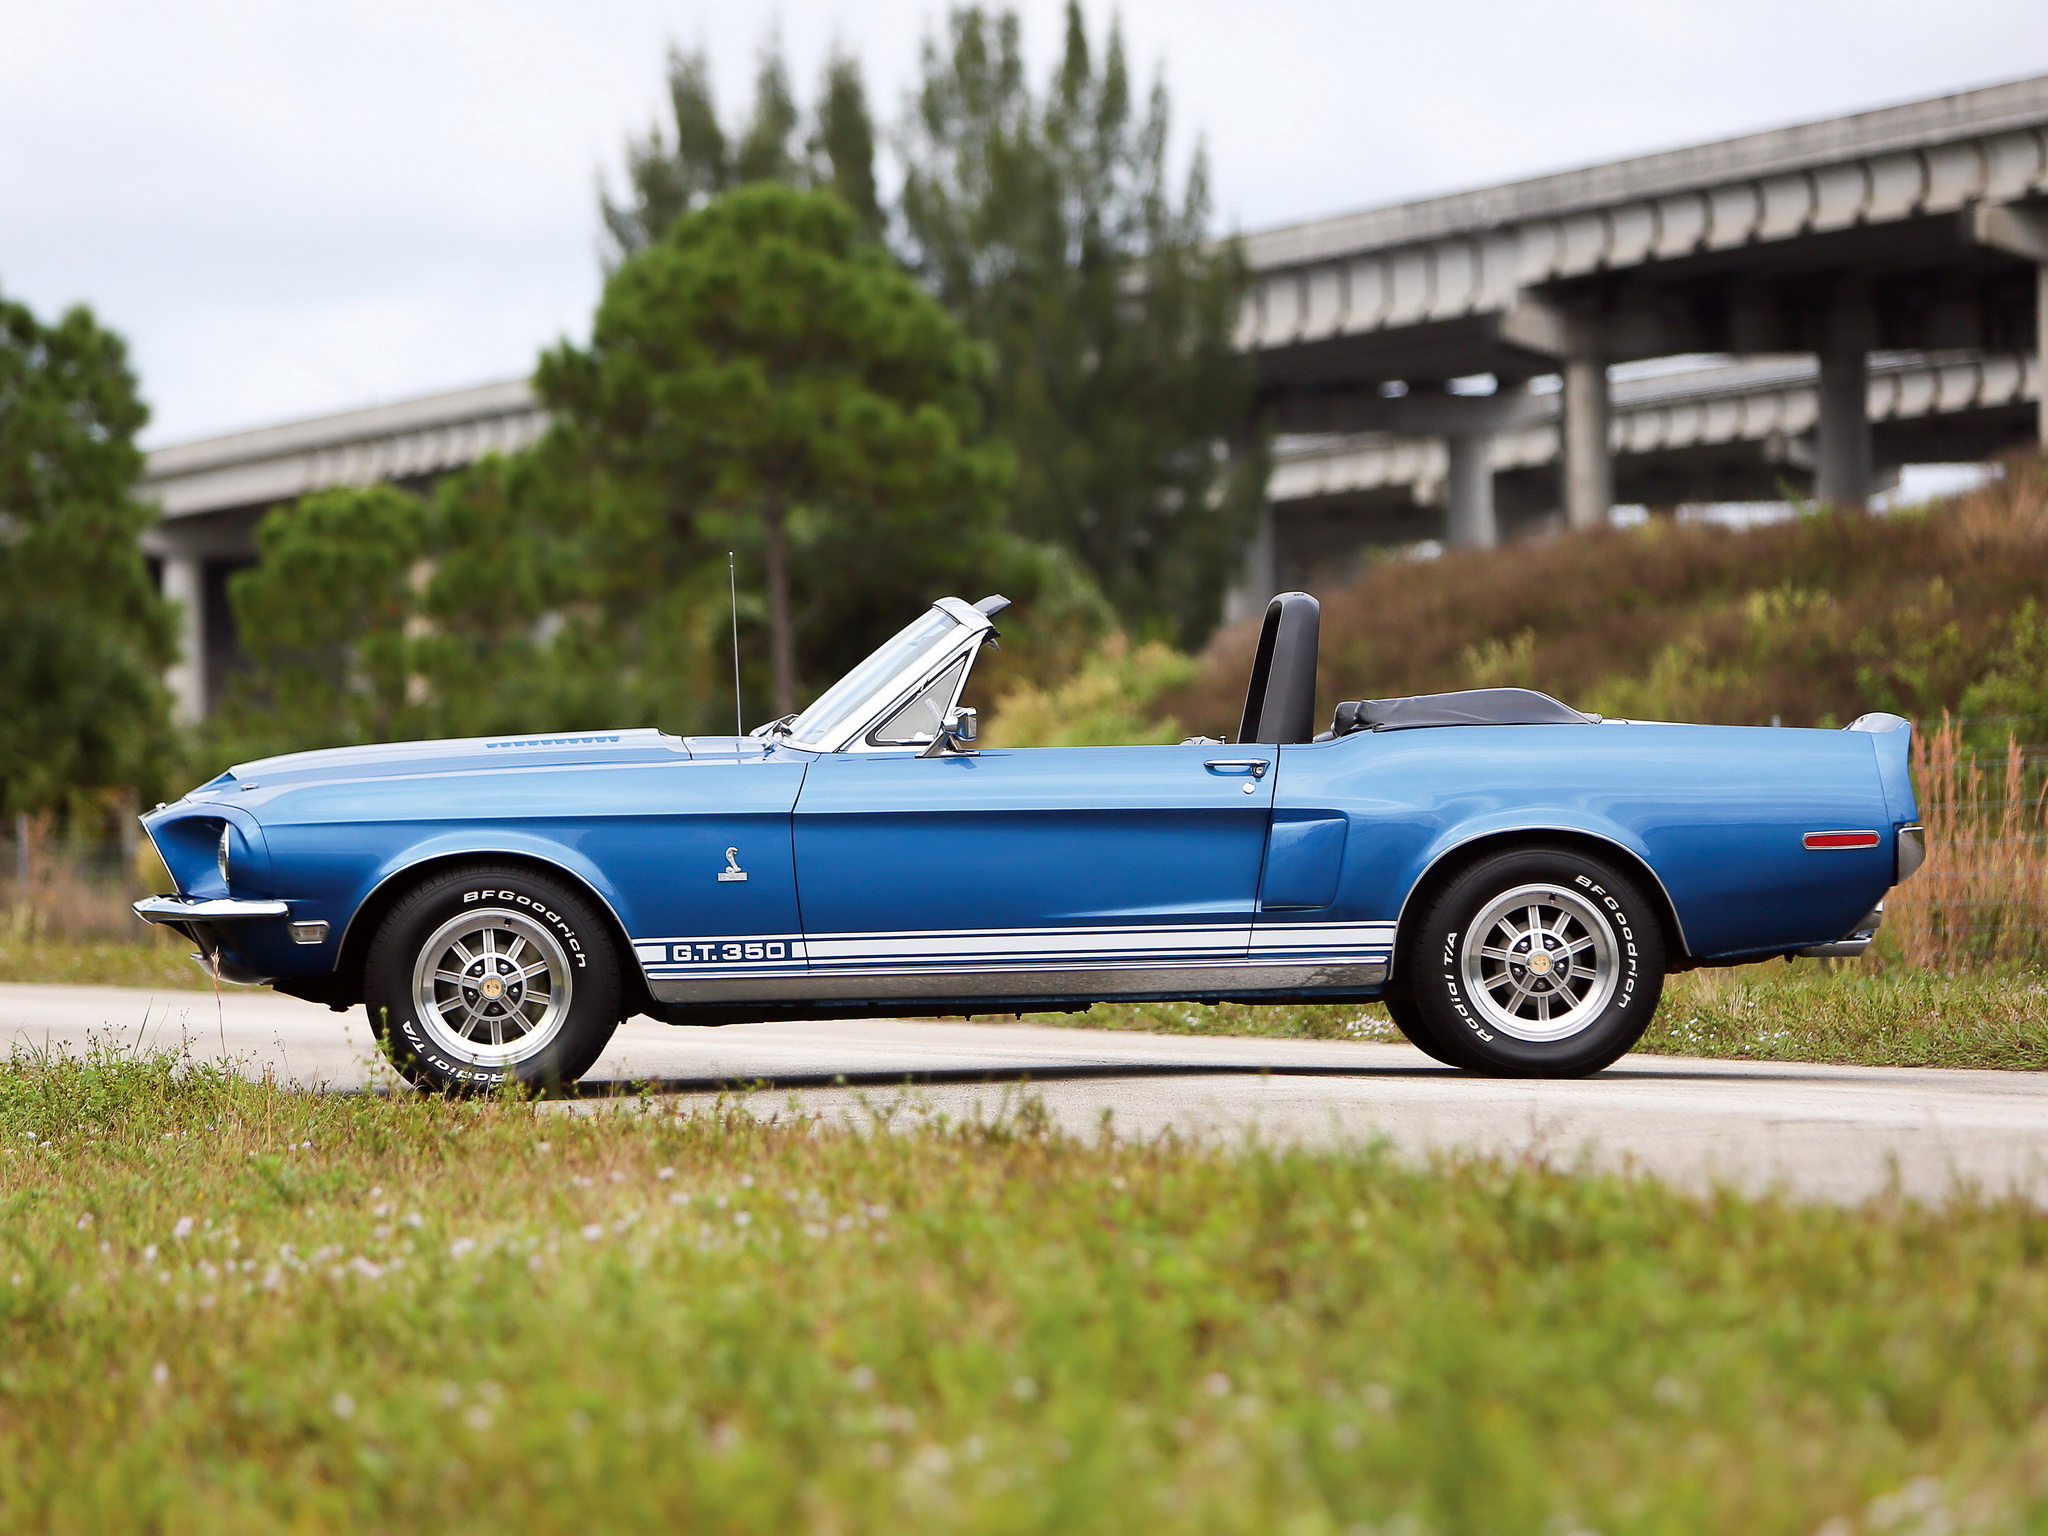 1968, Shelby, Gt350, Convertible, Ford, Mustang, Muscle, Classic Wallpaper